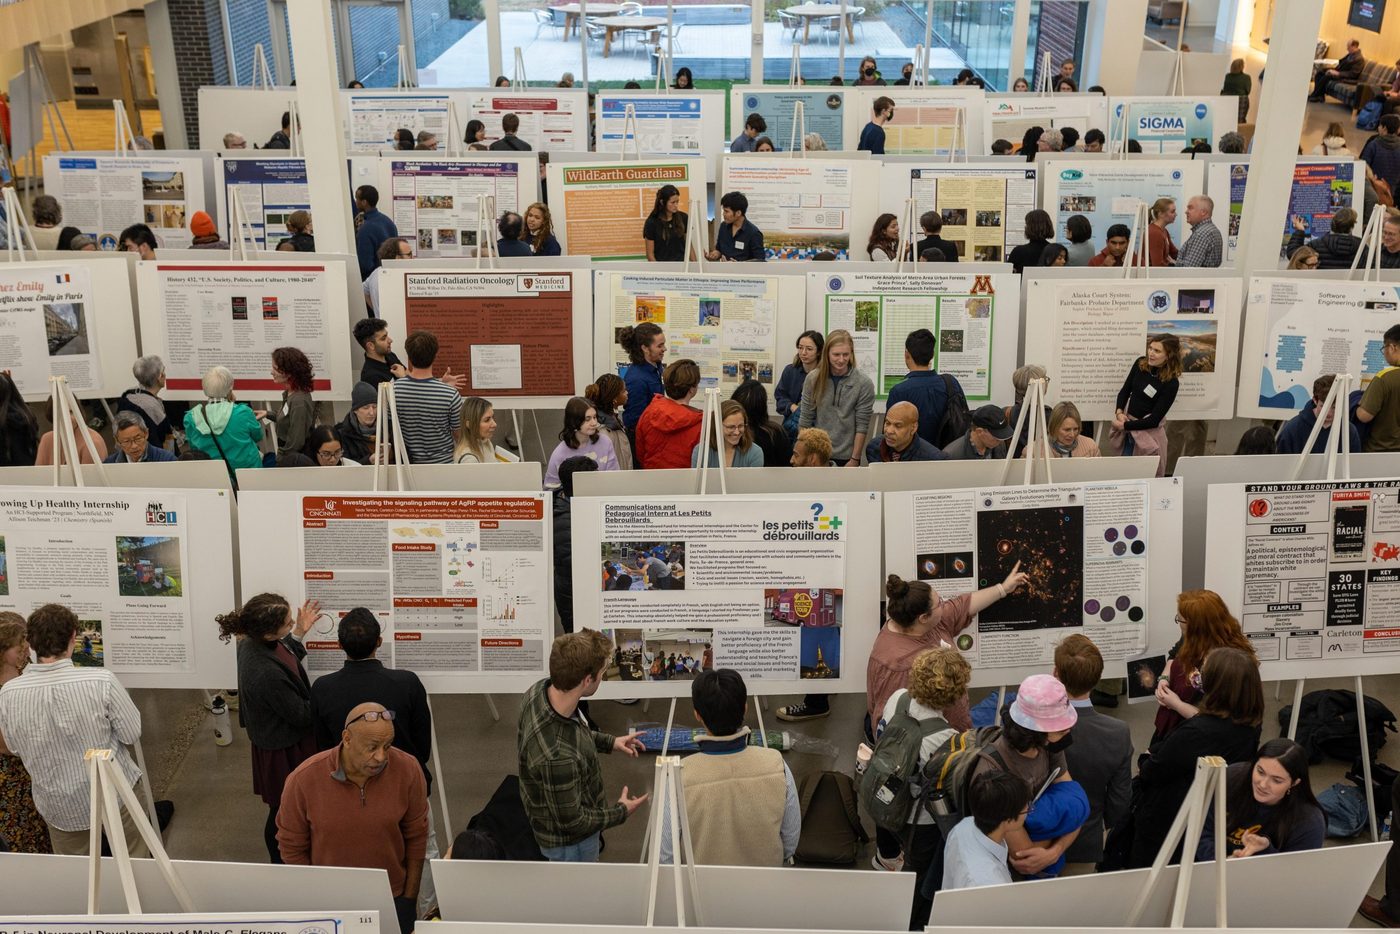 Student research poster session in the Weitz Center